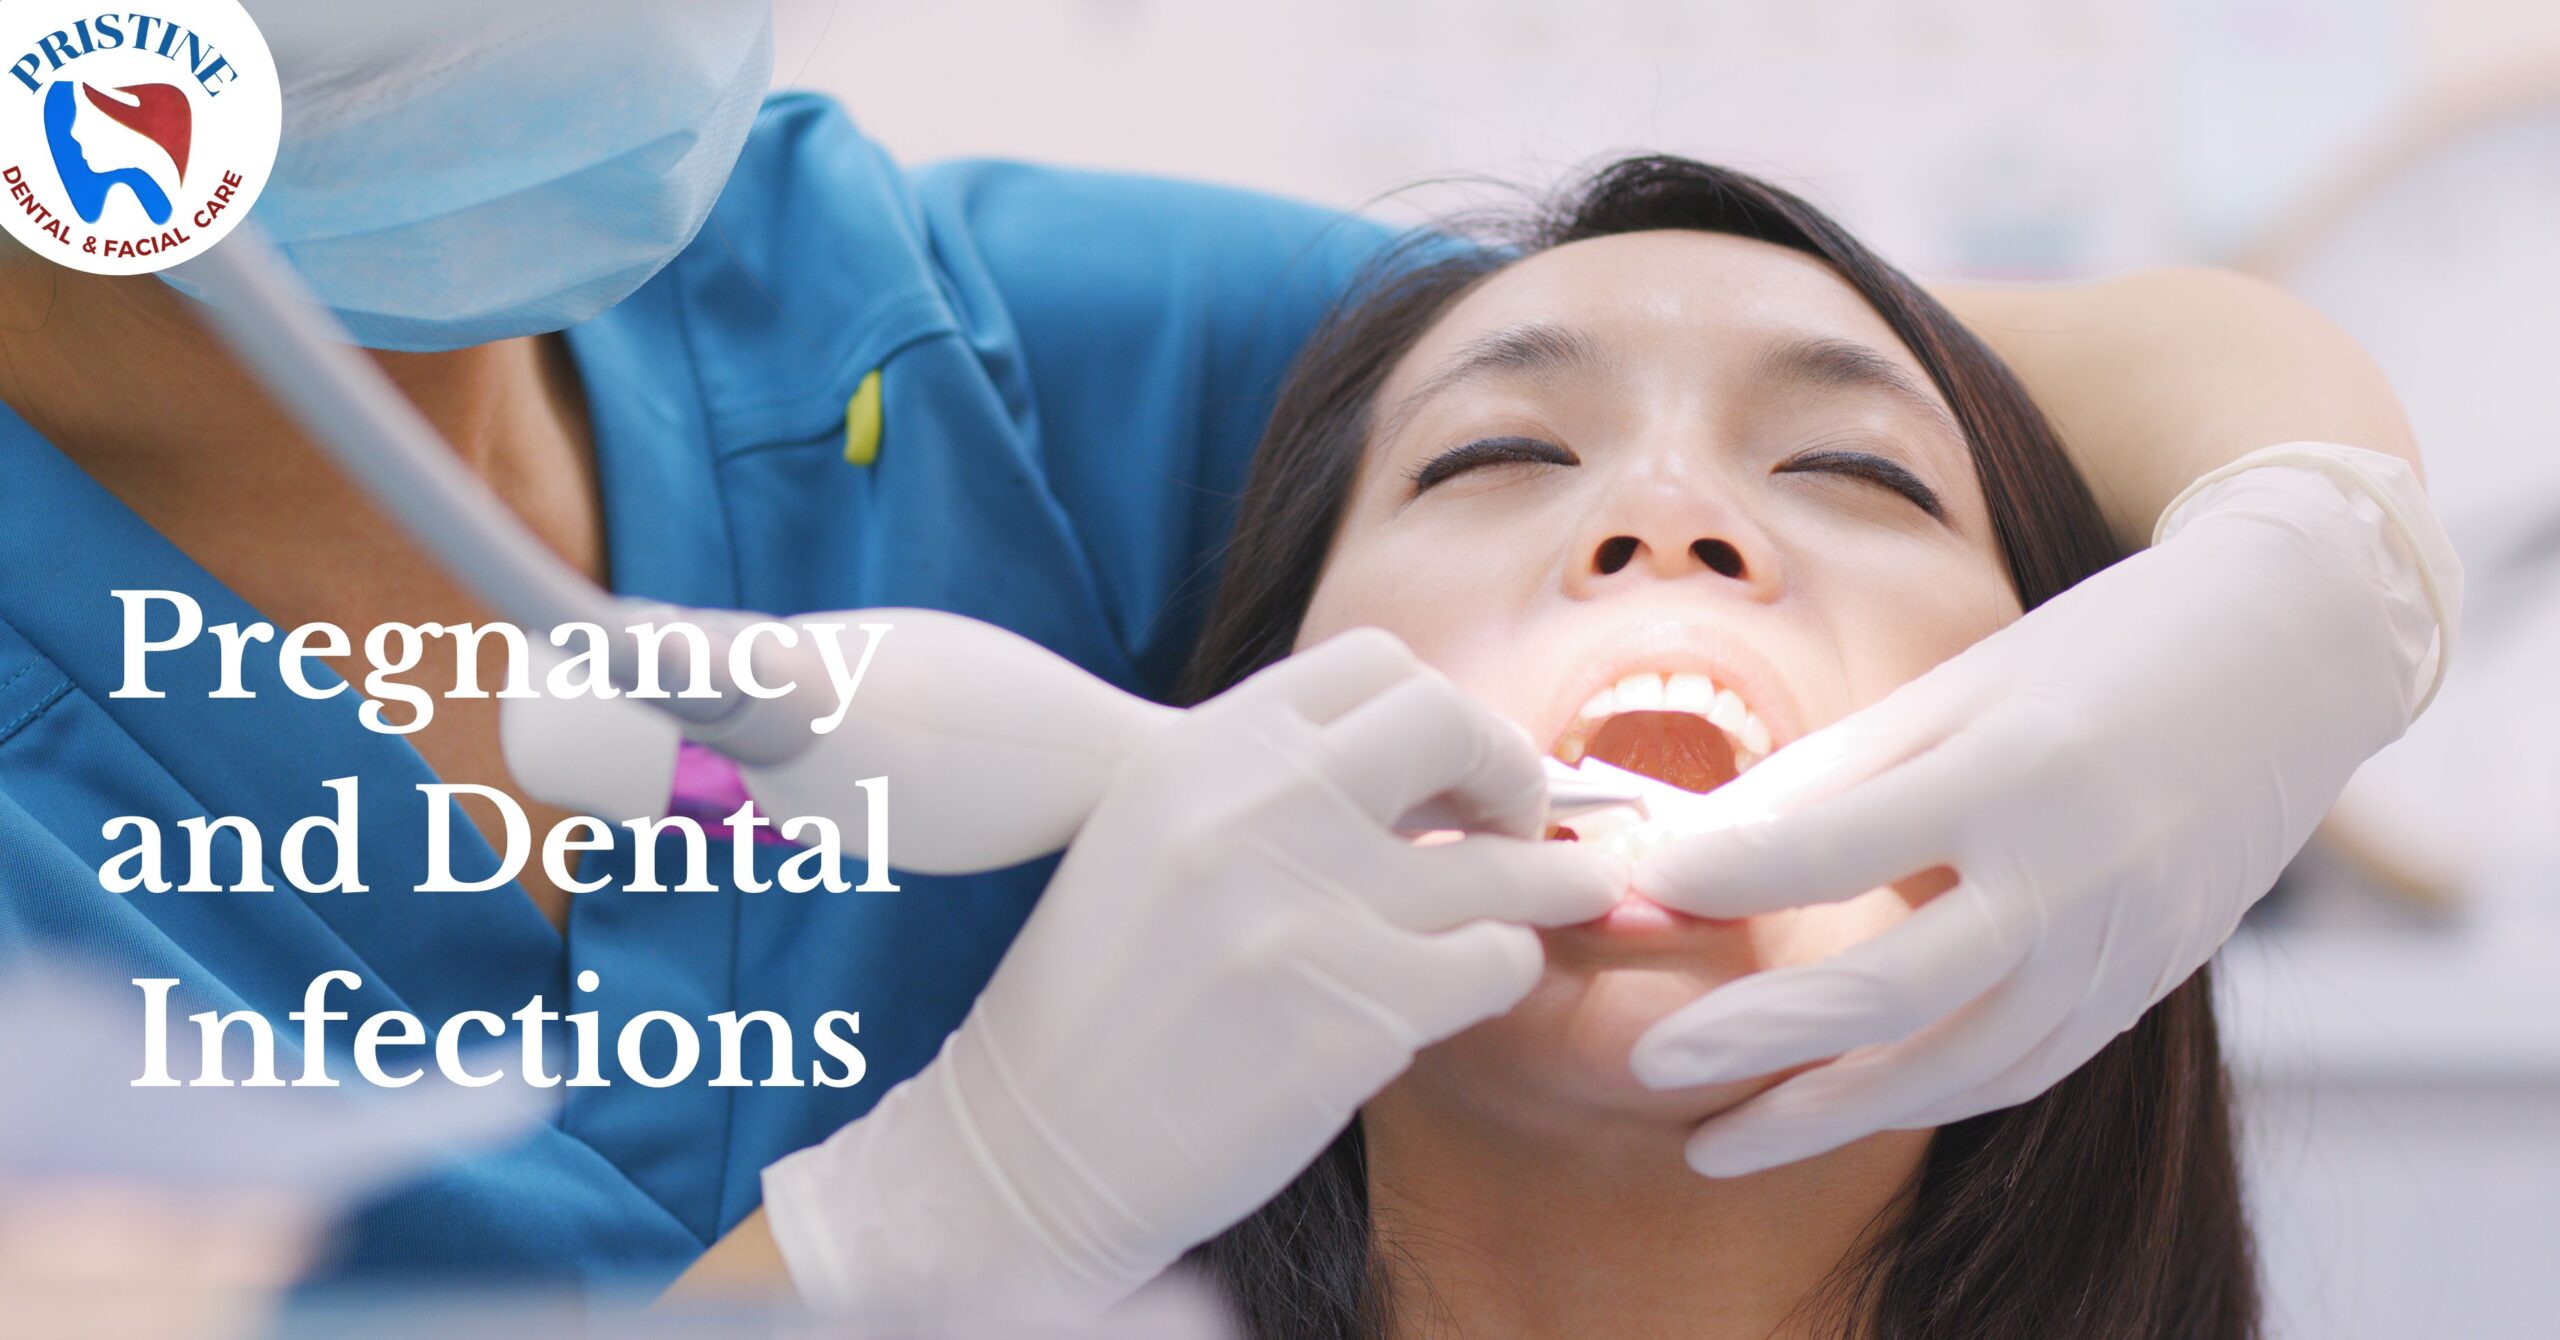 Pregnancy and dental infections